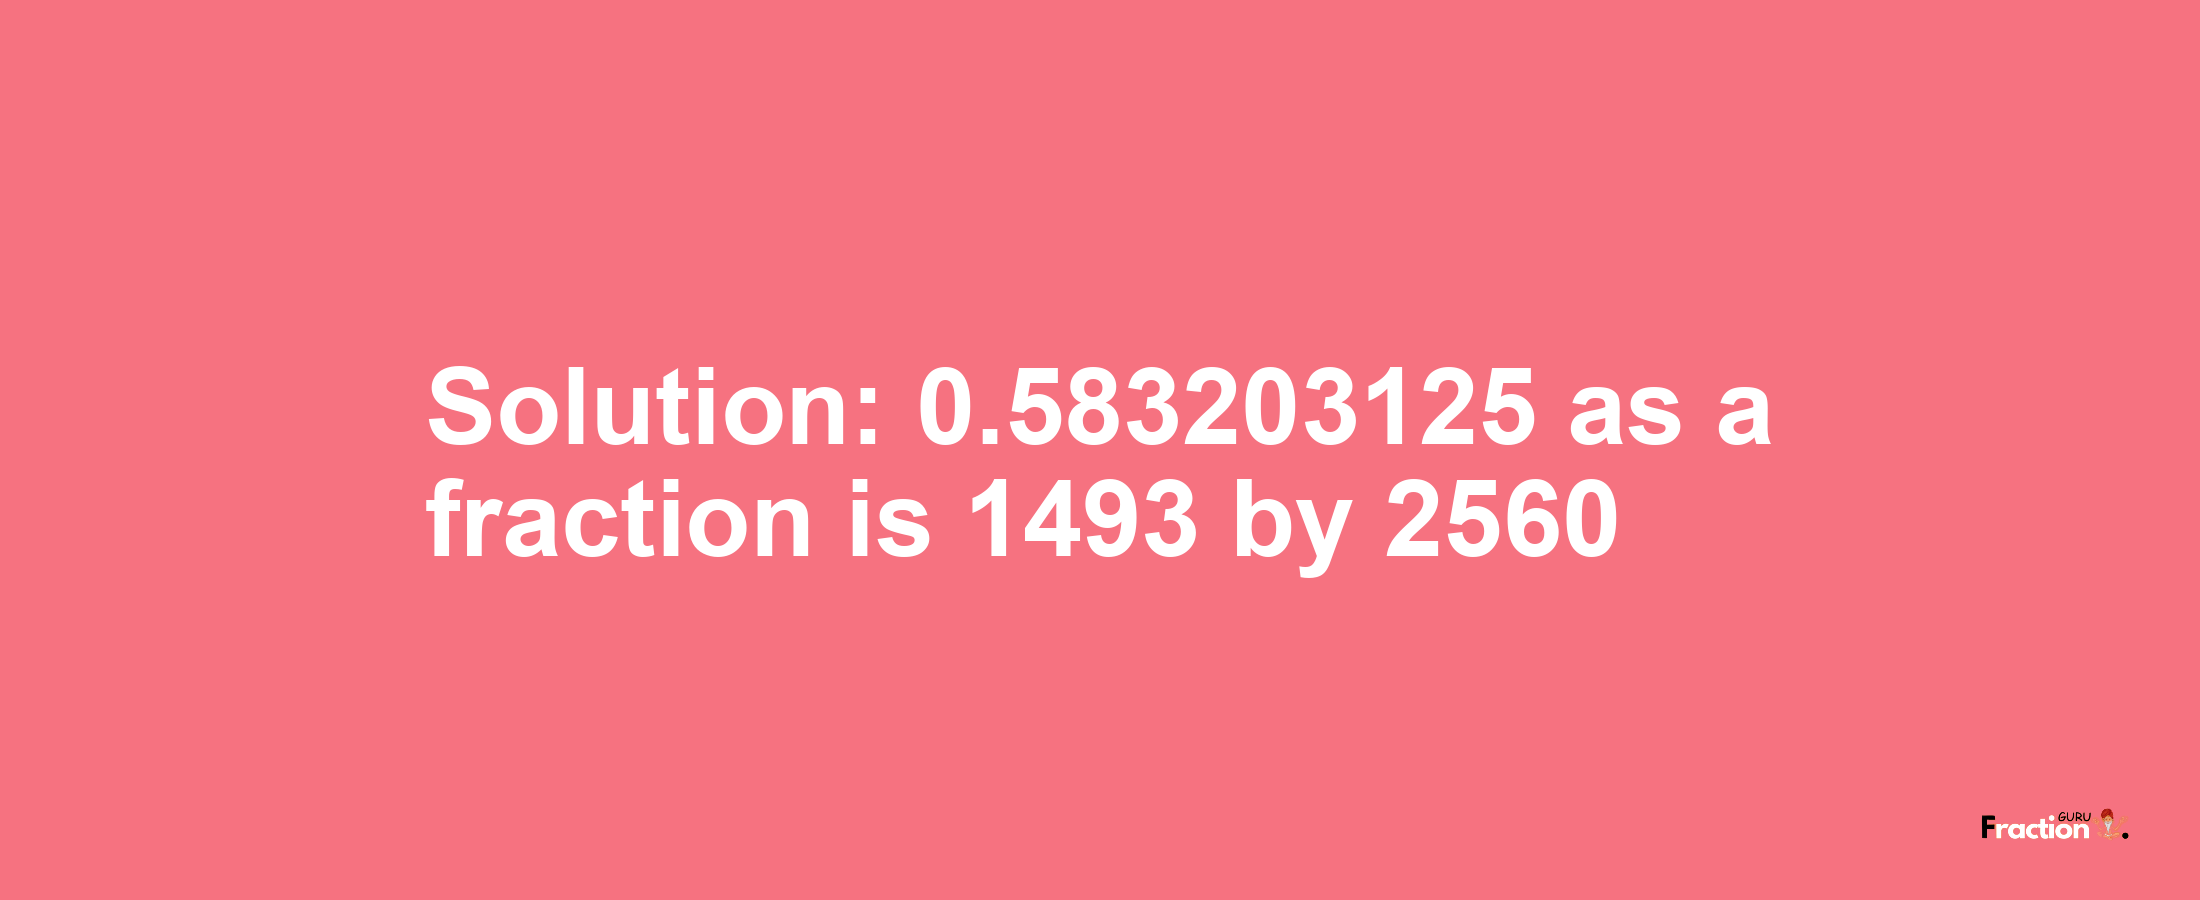 Solution:0.583203125 as a fraction is 1493/2560